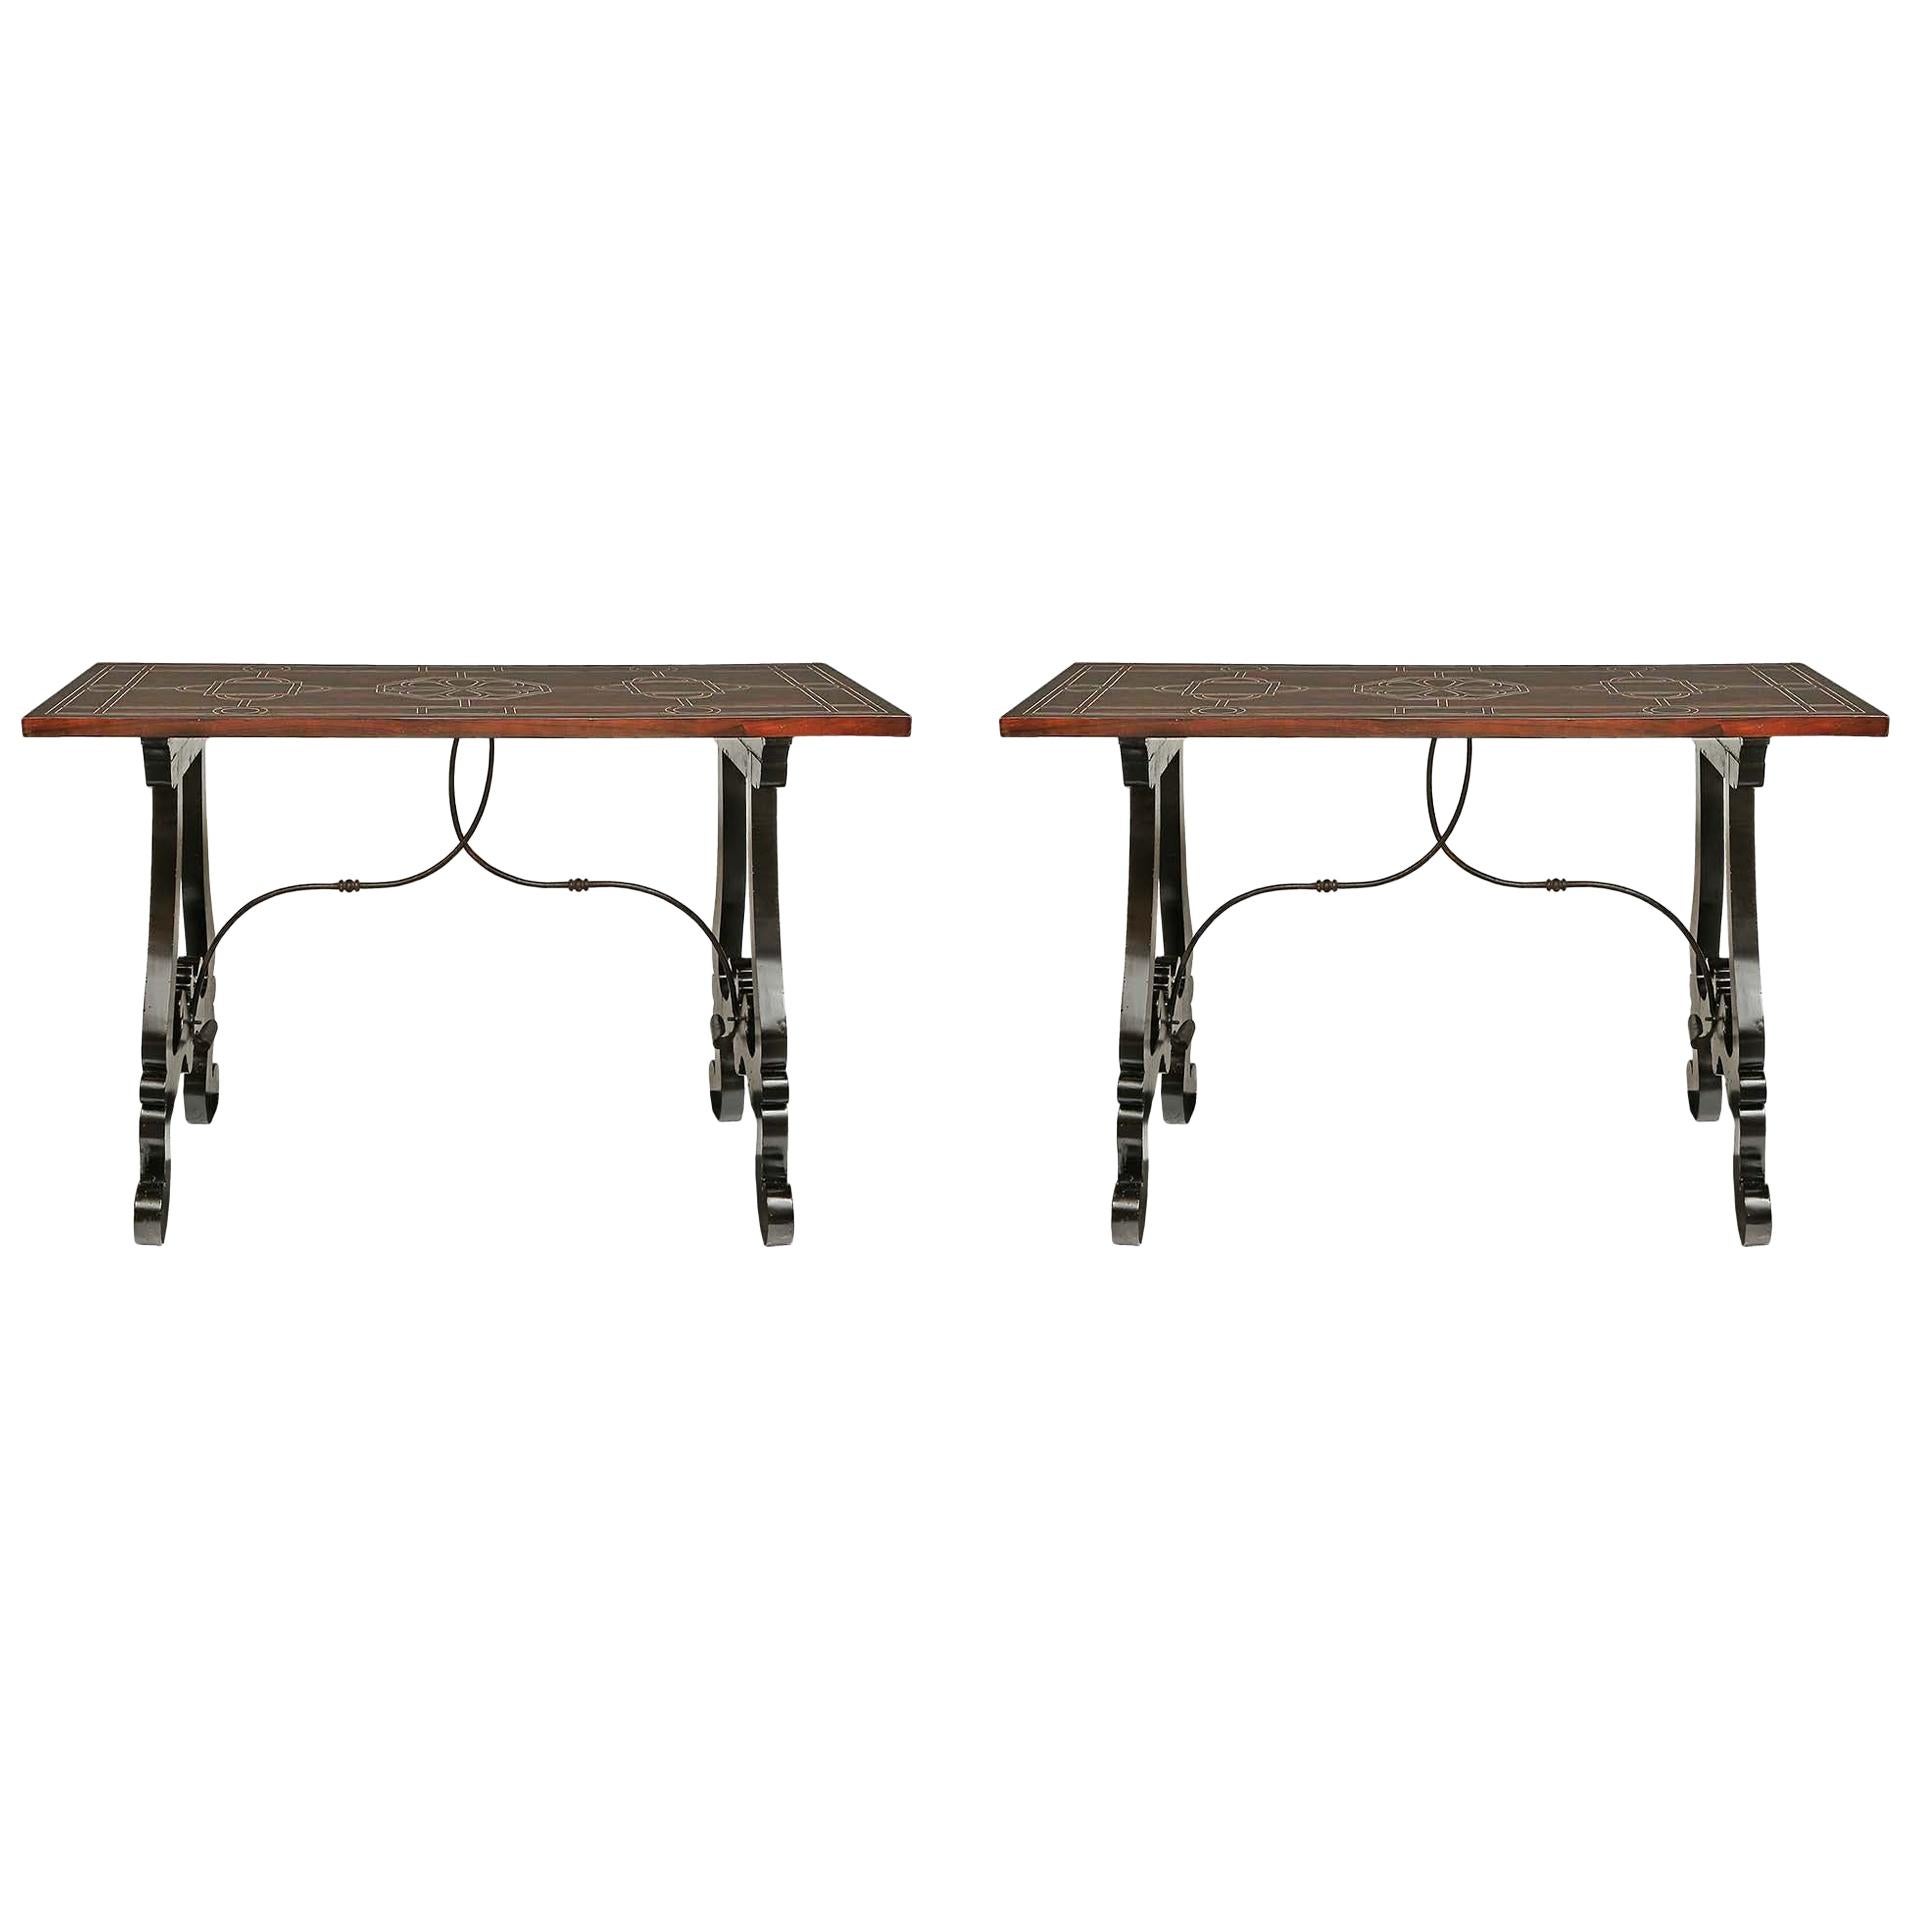 Pair of Italian 17th Century Trestle Tables from Florence